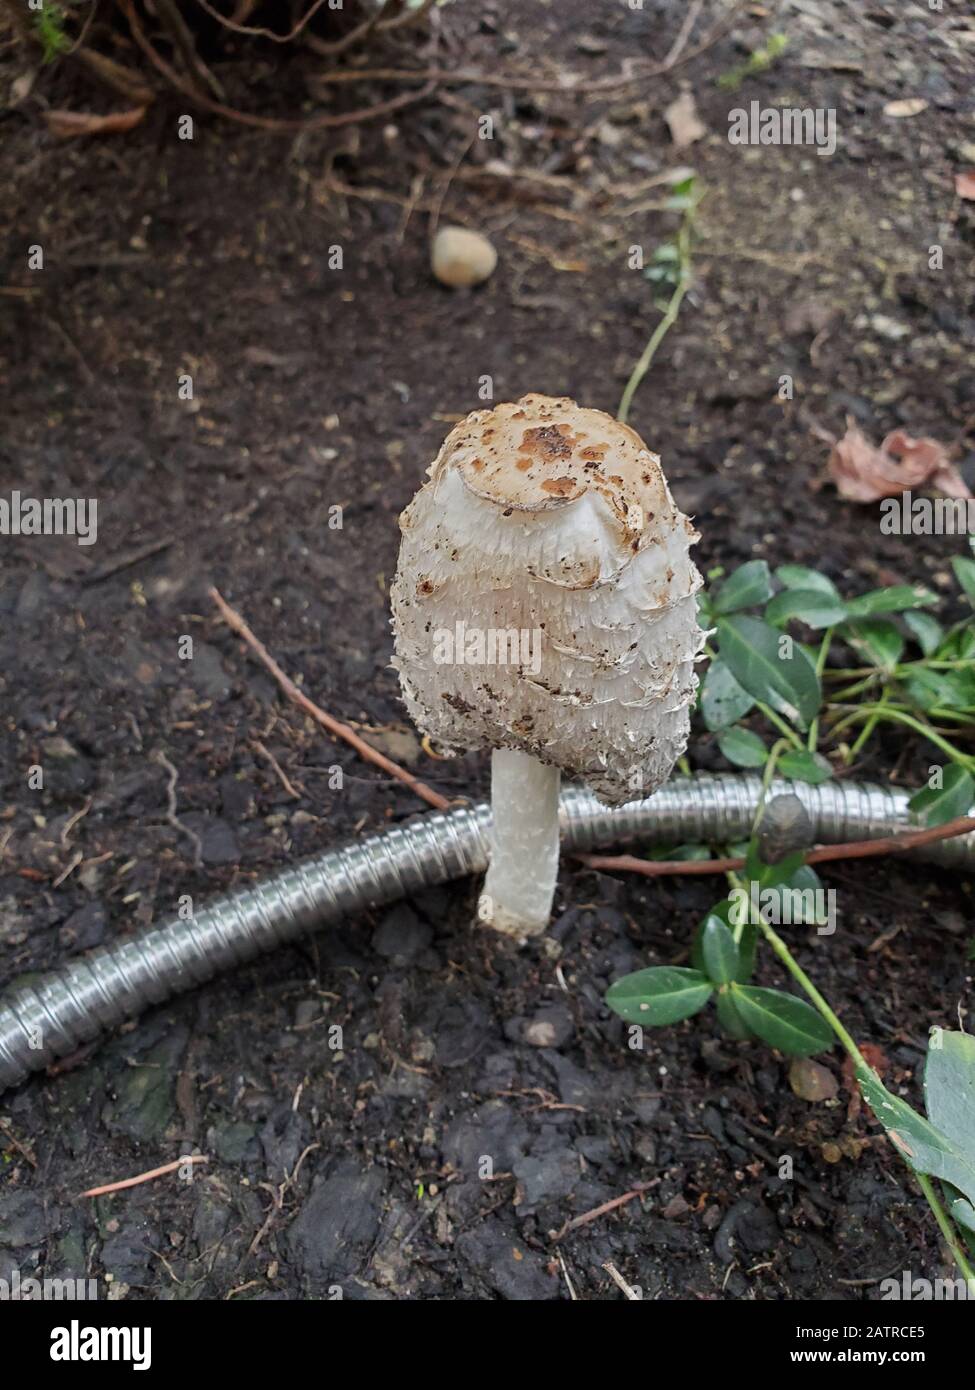 Close-up of cap of a Coprinus comatus or shaggy ink cap mushrooom growing in a garden setting, January 20, 2020. () Stock Photo